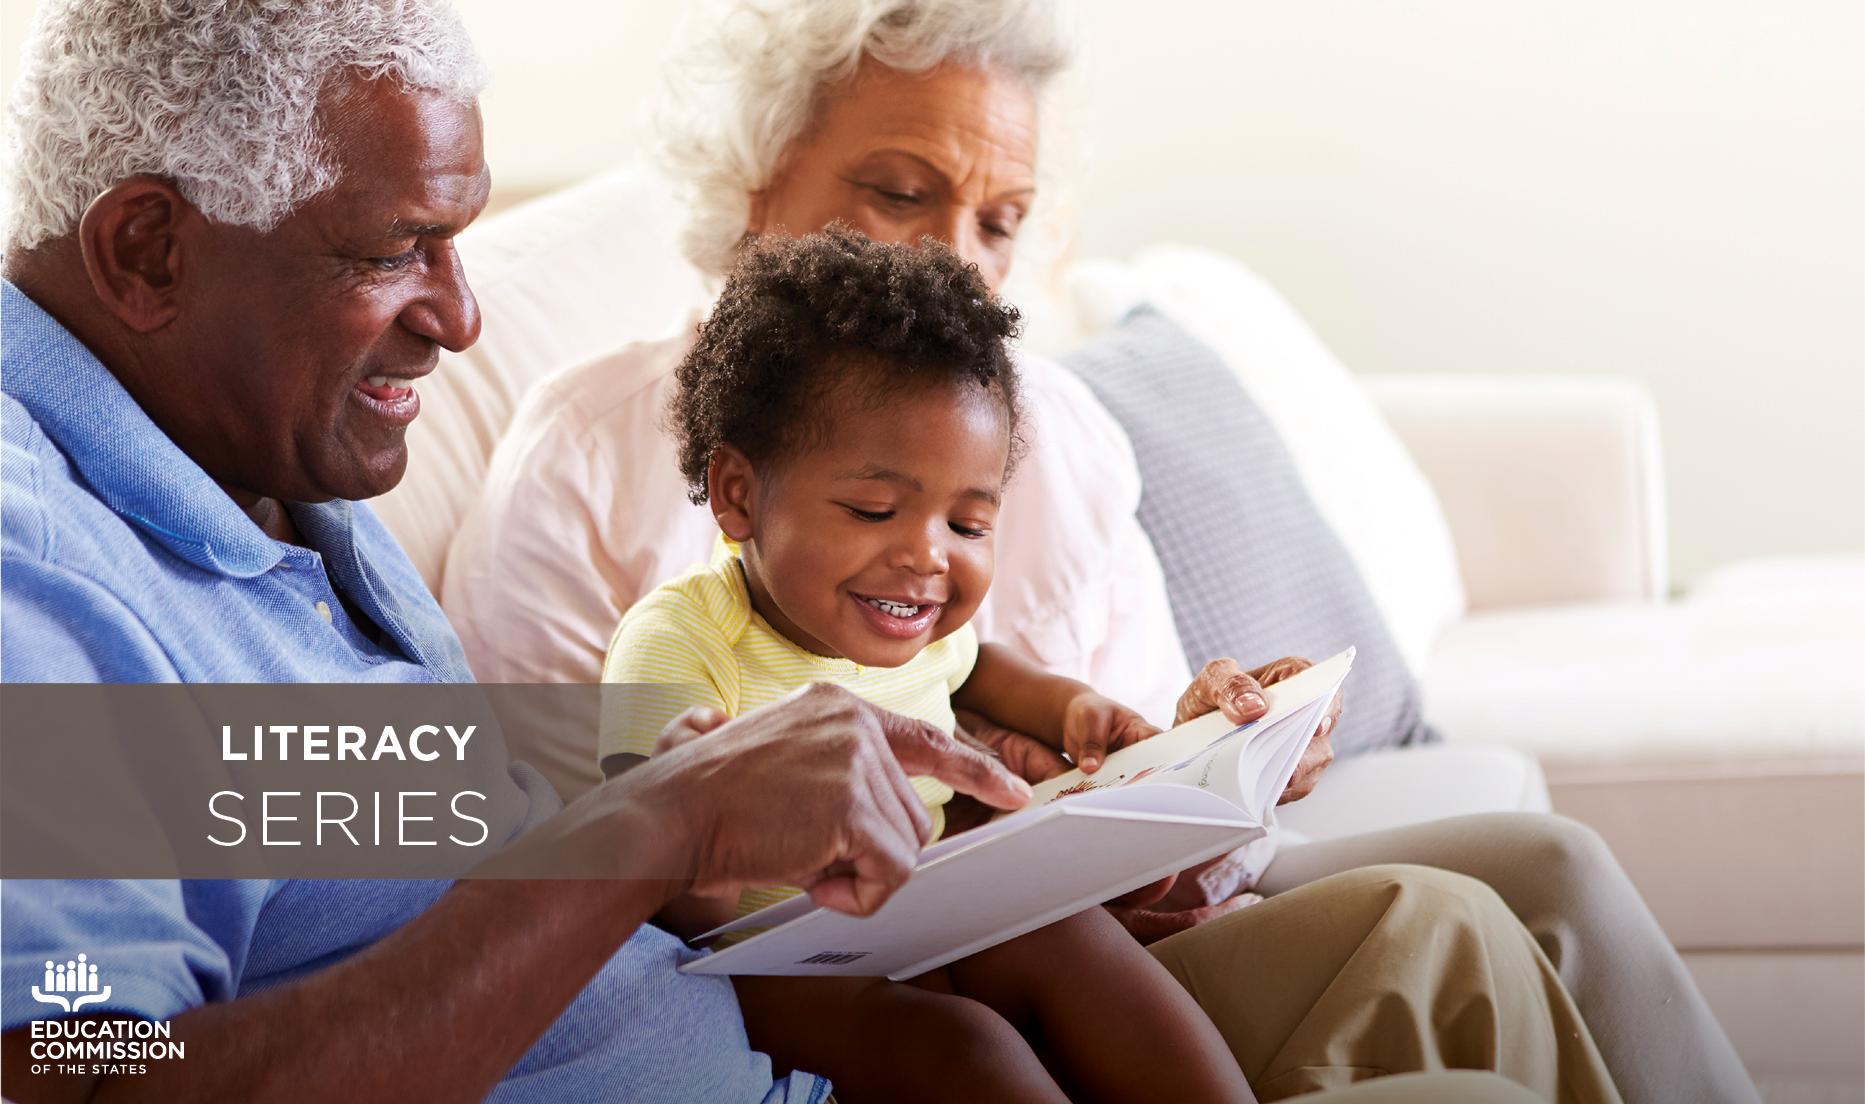 Grandparents sit on a sofa with their infant grandchild on their laps. They are all reading a storybook together.